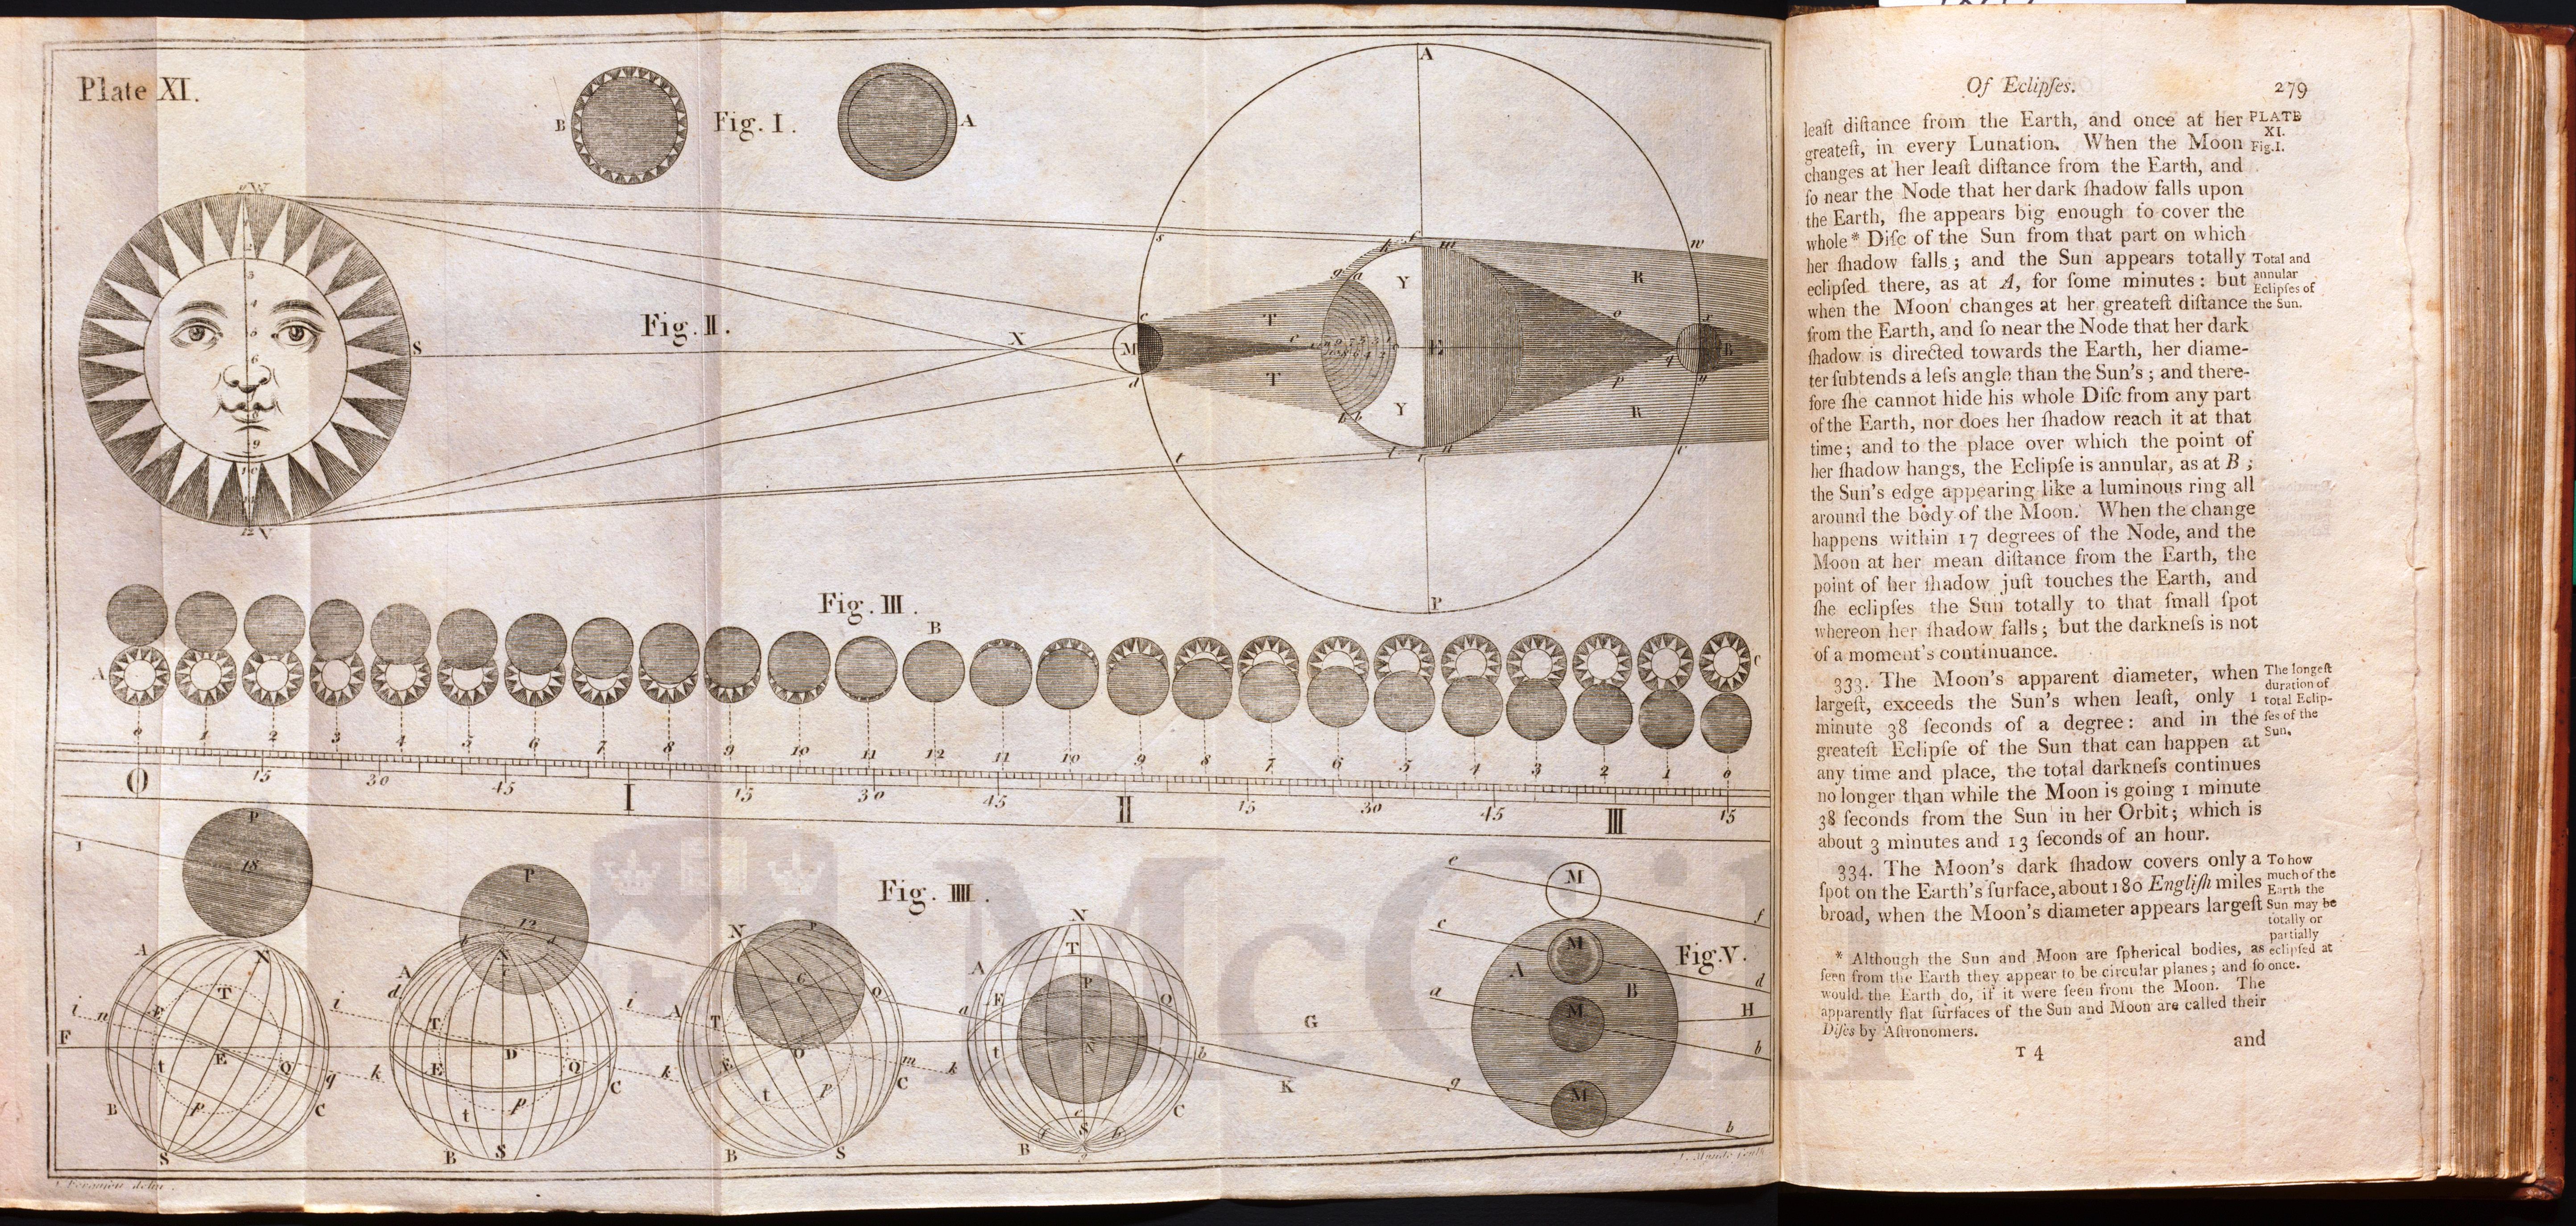 James Ferguson, "Astronomy explained upon Sir Isaac Newton's Principles, and made easy to those who have not studied mathematics." (1809)